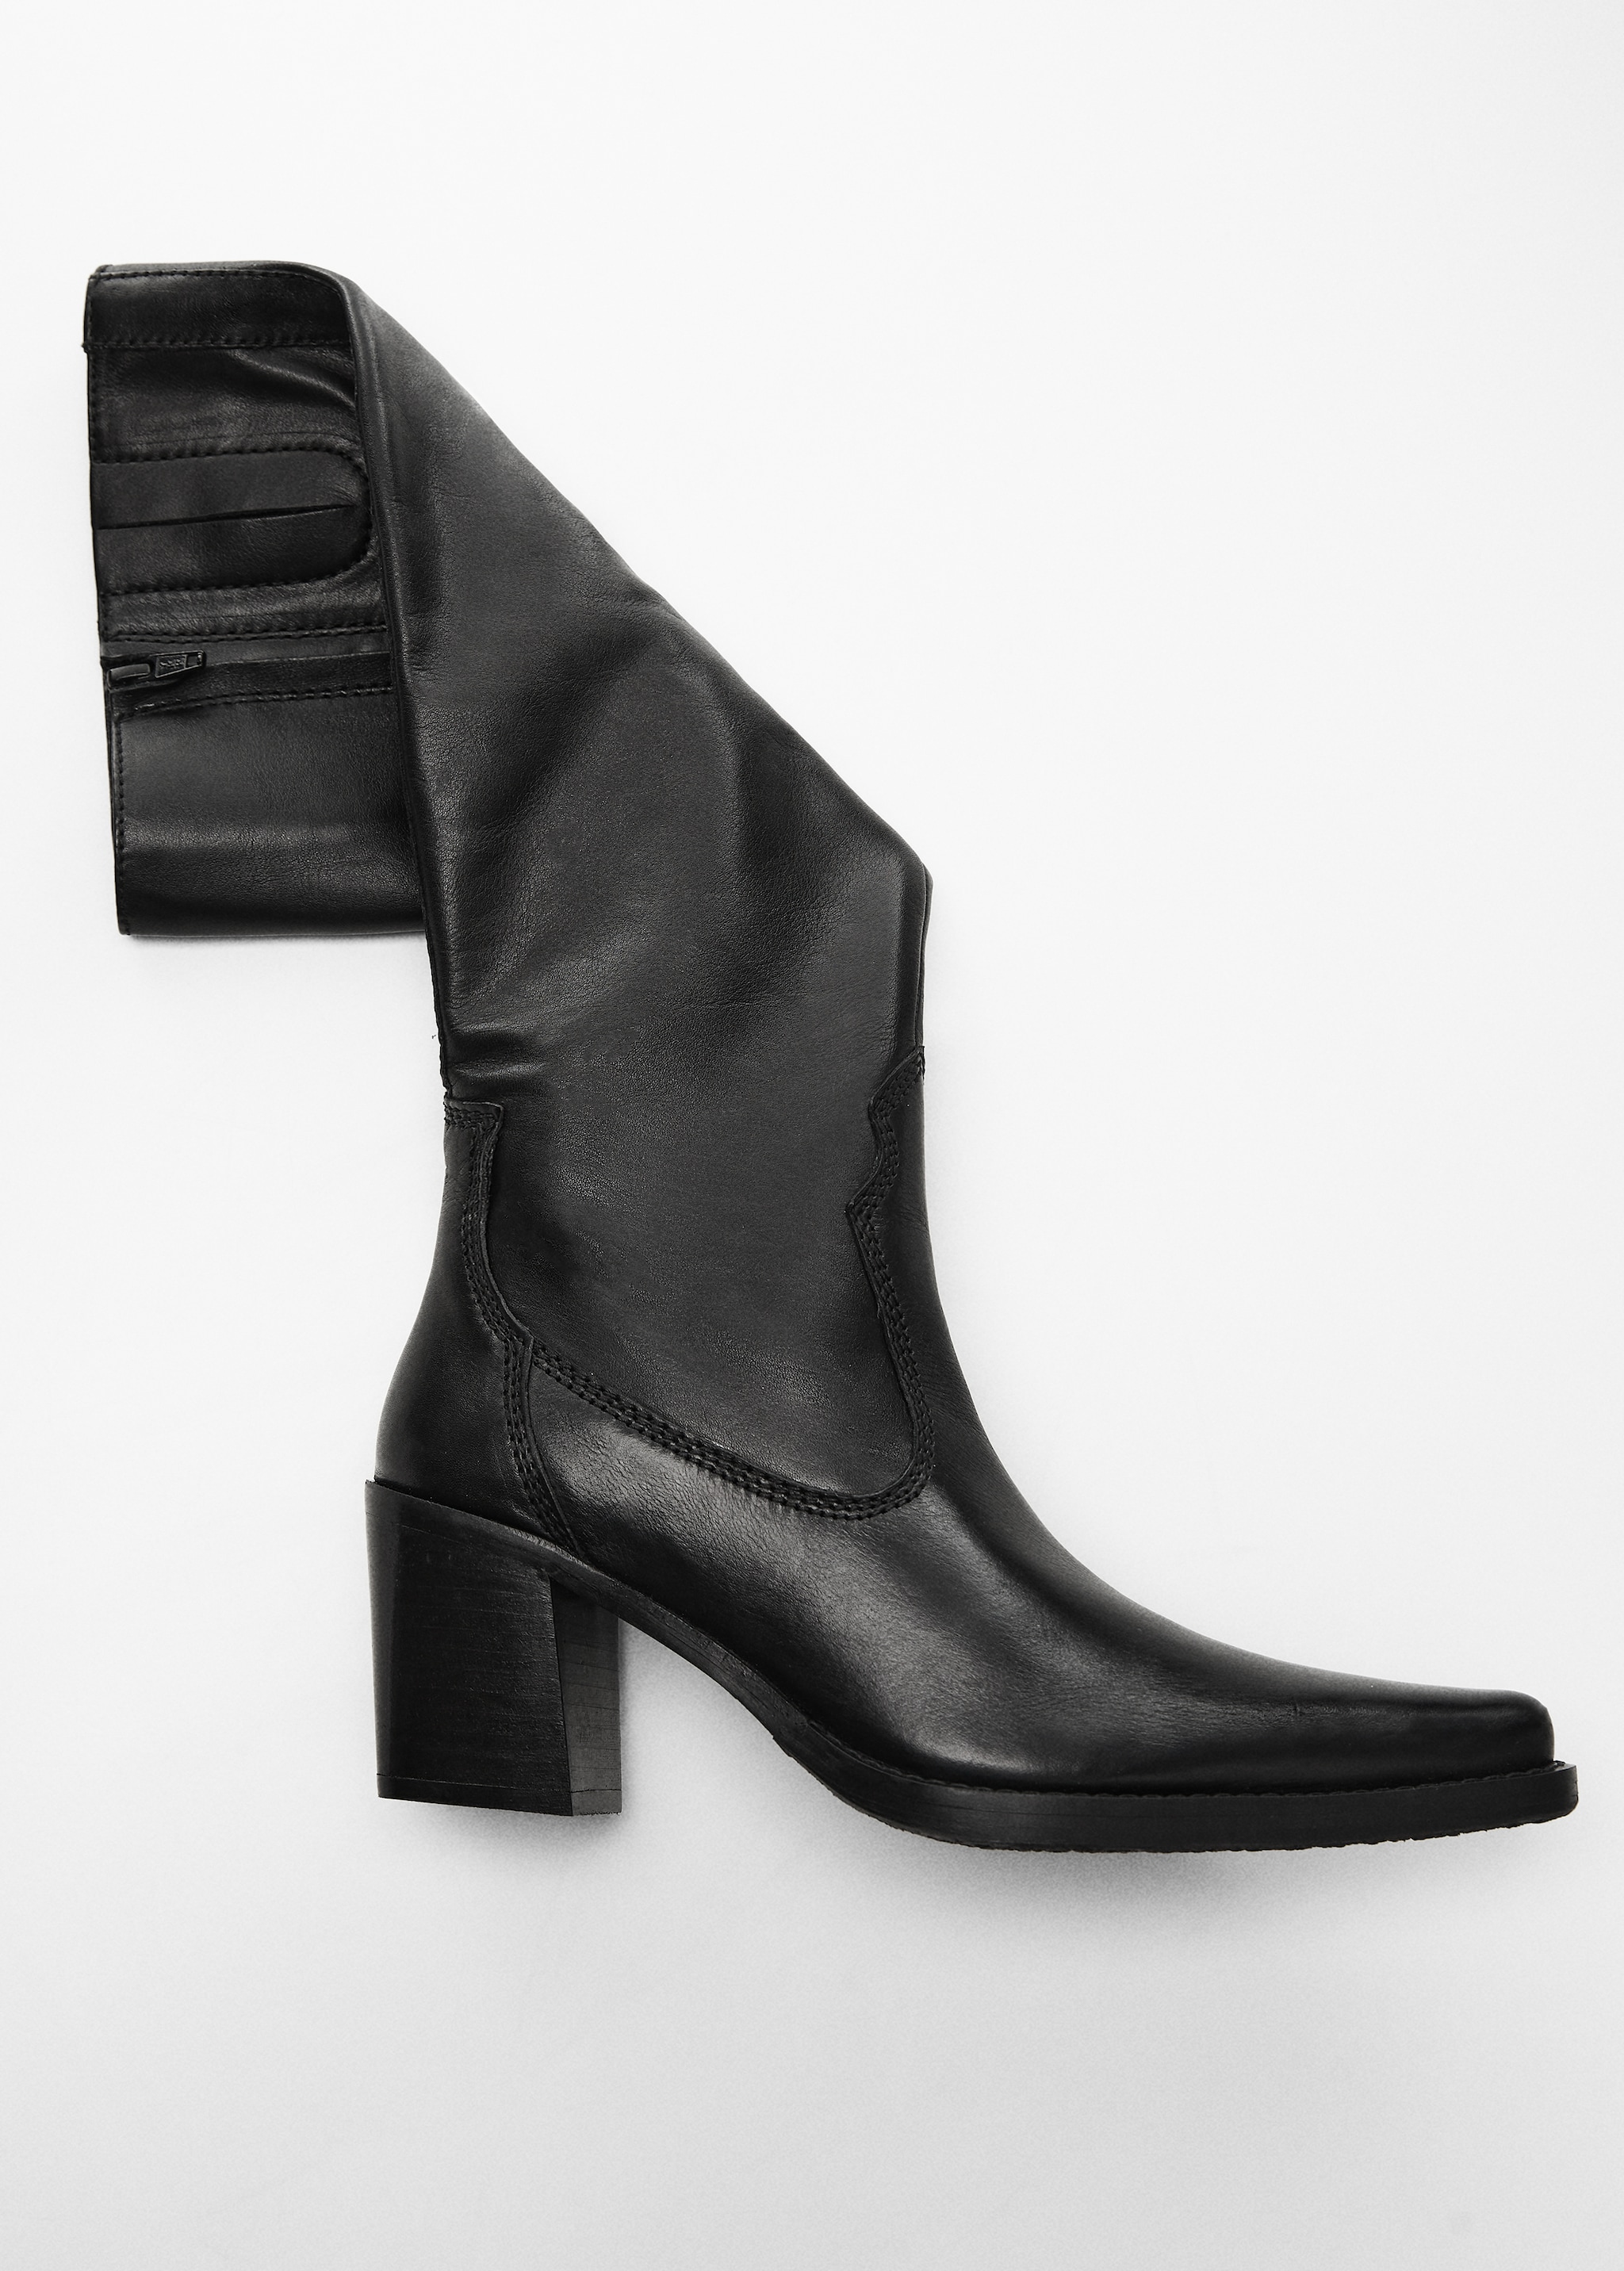 High heel leather boot - Details of the article 5